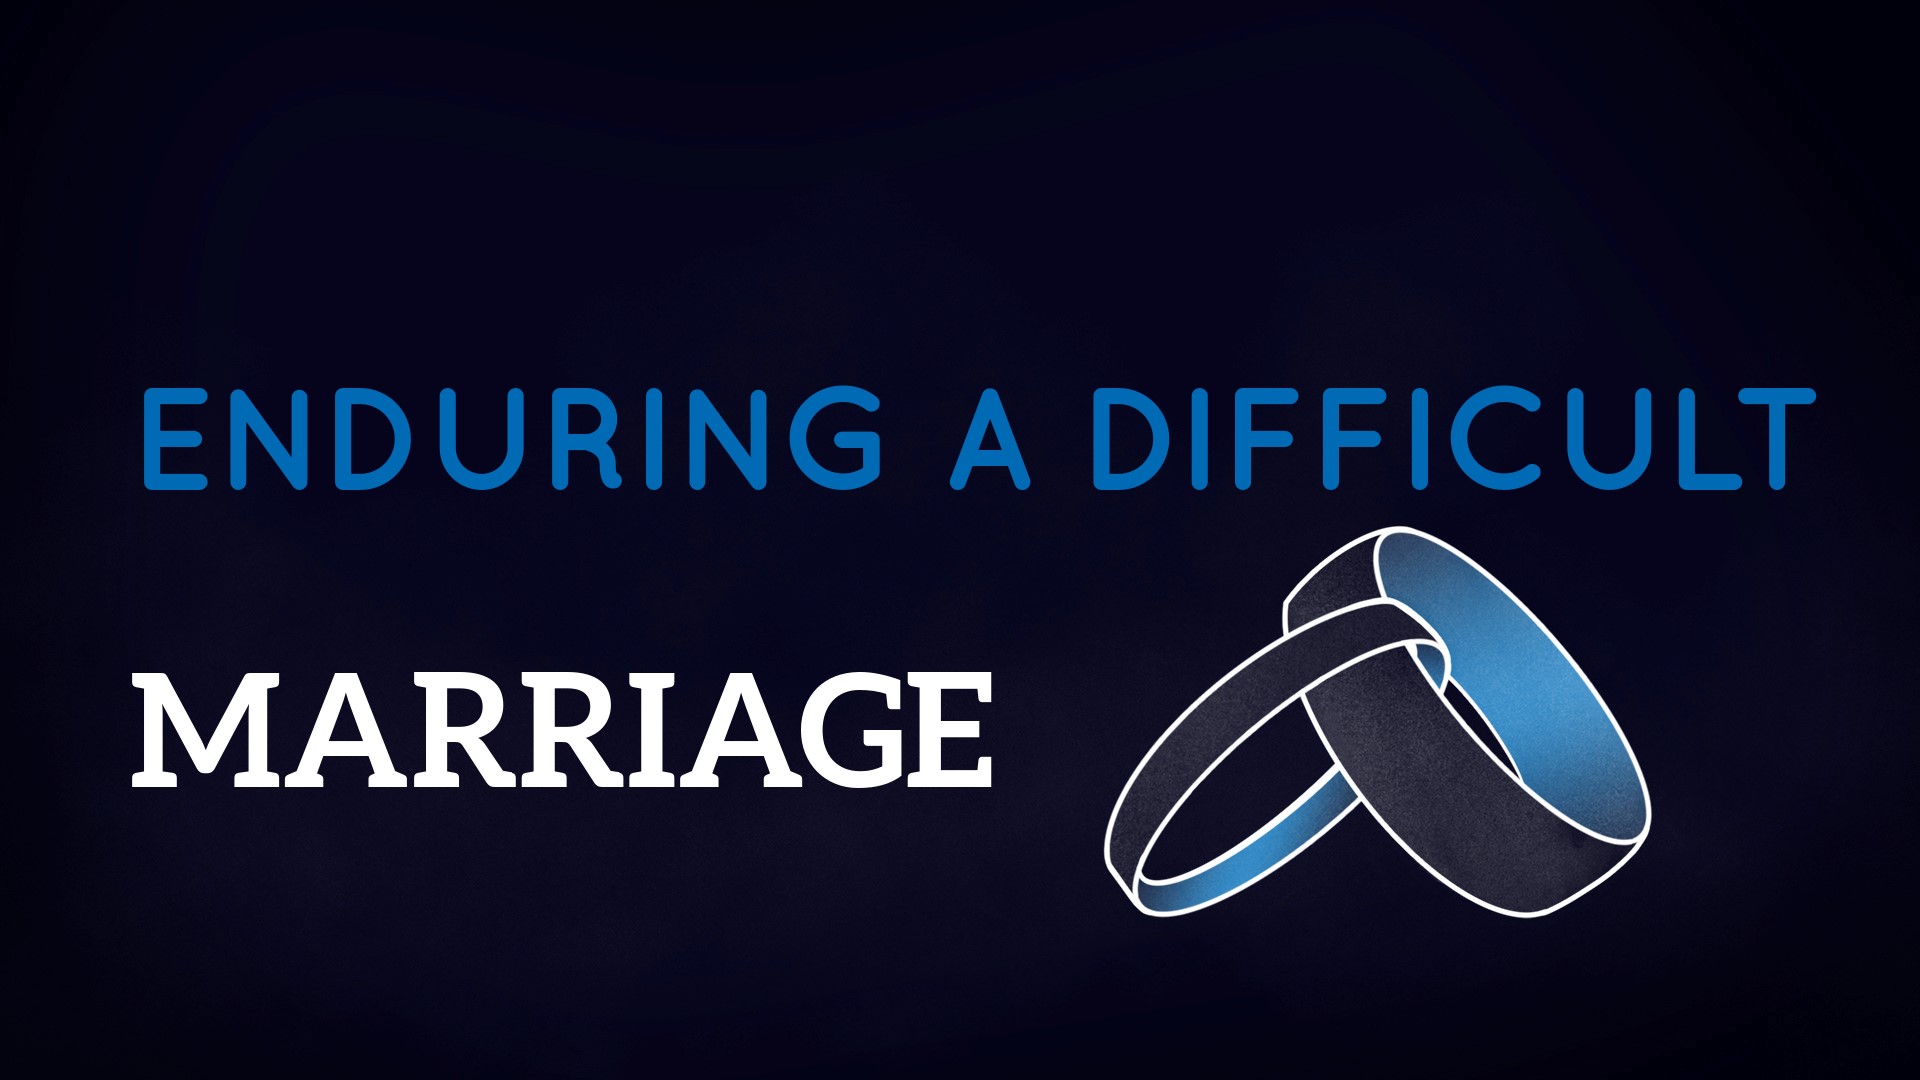 Enduring a Difficult Marriage